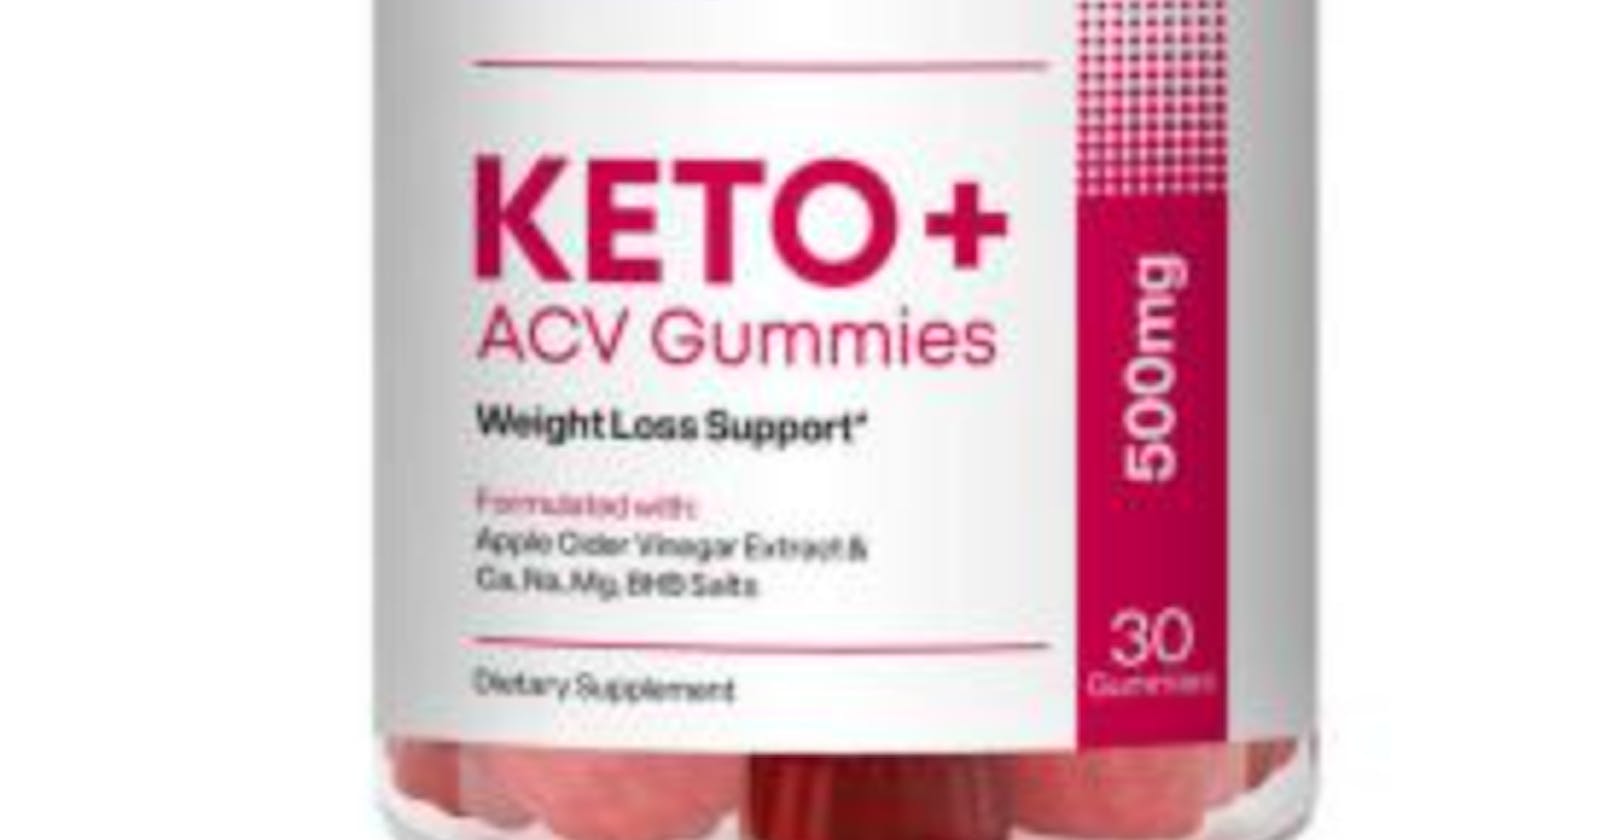 ReFit Keto ACV Gummies Reviews For Weight Loss In USA?